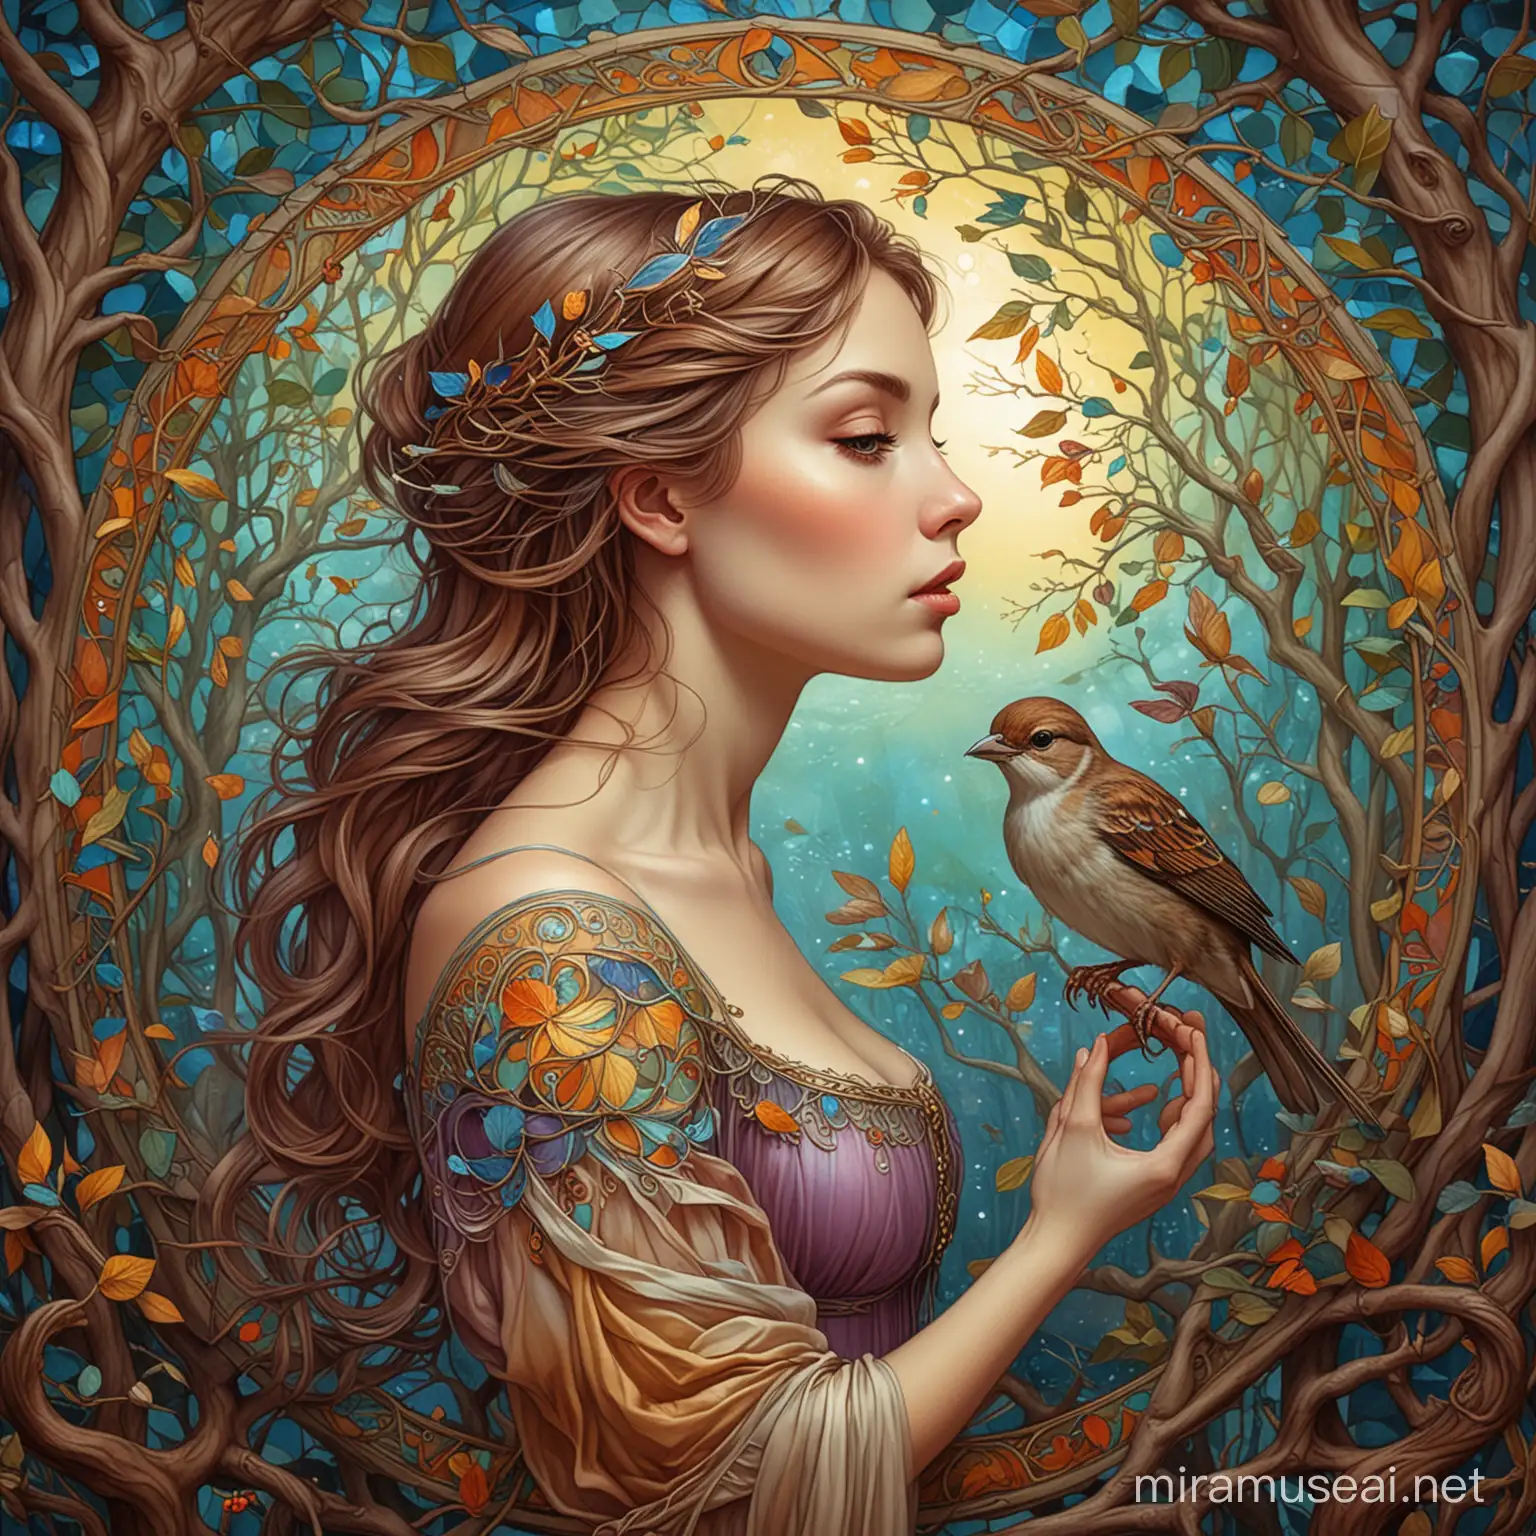 art nouveau style, sparrow, young haunting woman, tree of life, colorful, mystical world